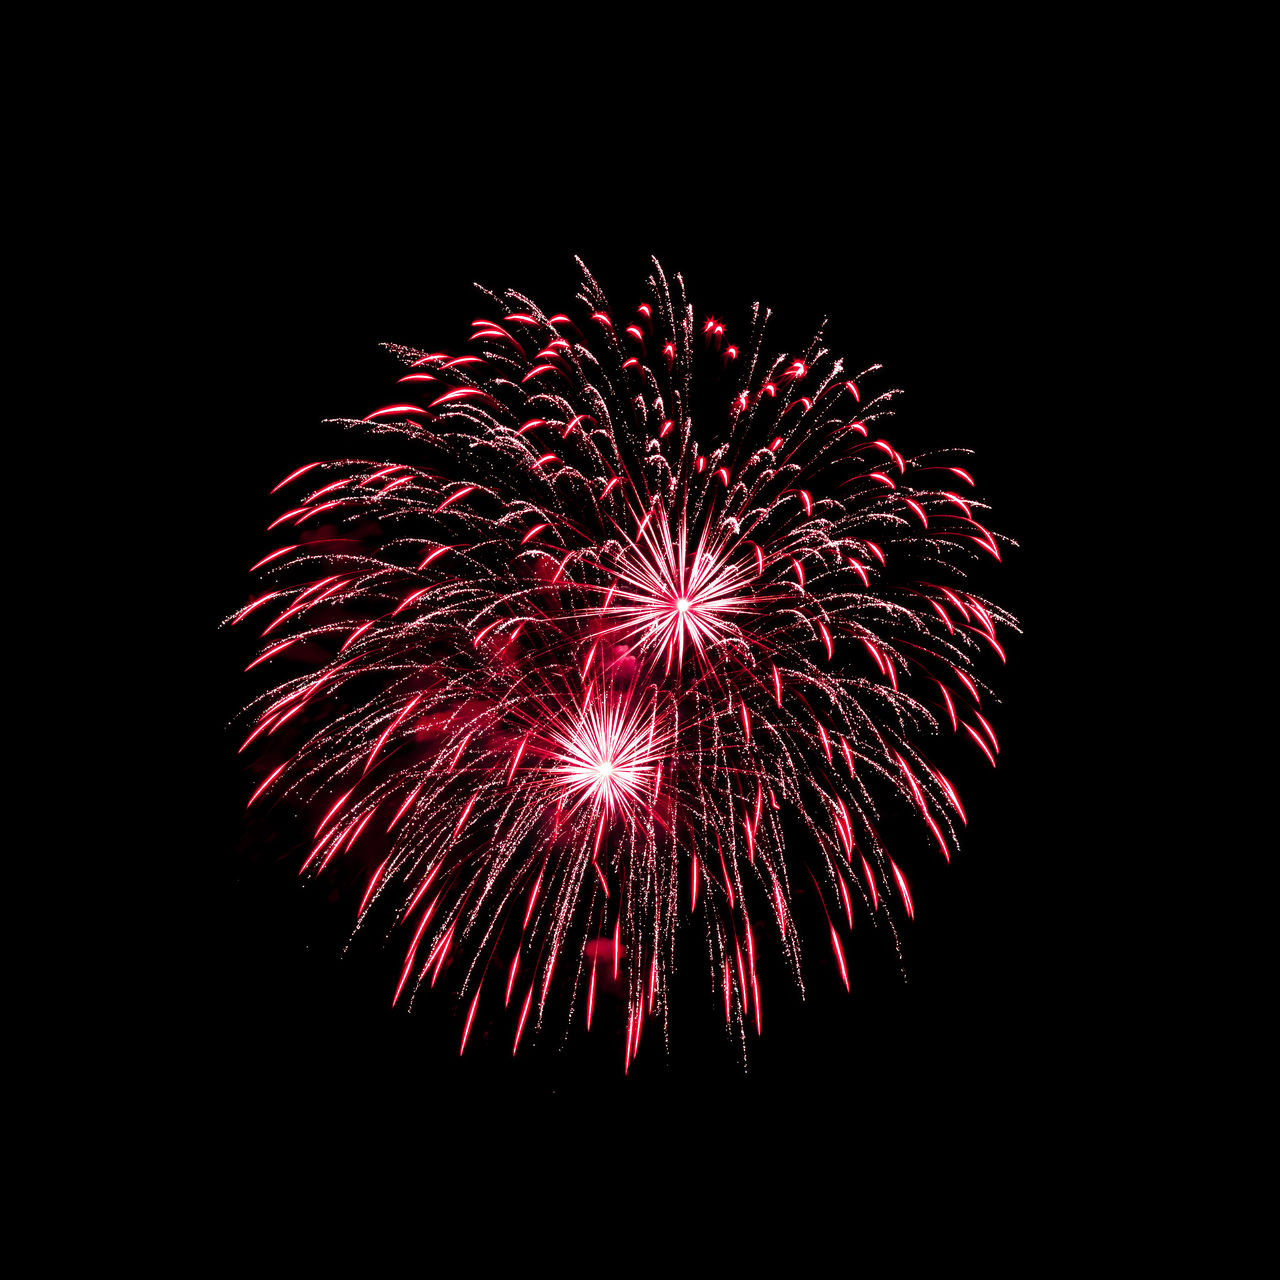 fireworks, celebration, firework display, night, exploding, event, motion, arts culture and entertainment, illuminated, glowing, sky, low angle view, recreation, no people, nature, firework - man made object, multi colored, long exposure, red, copy space, dark, outdoors, blurred motion, black and white, black